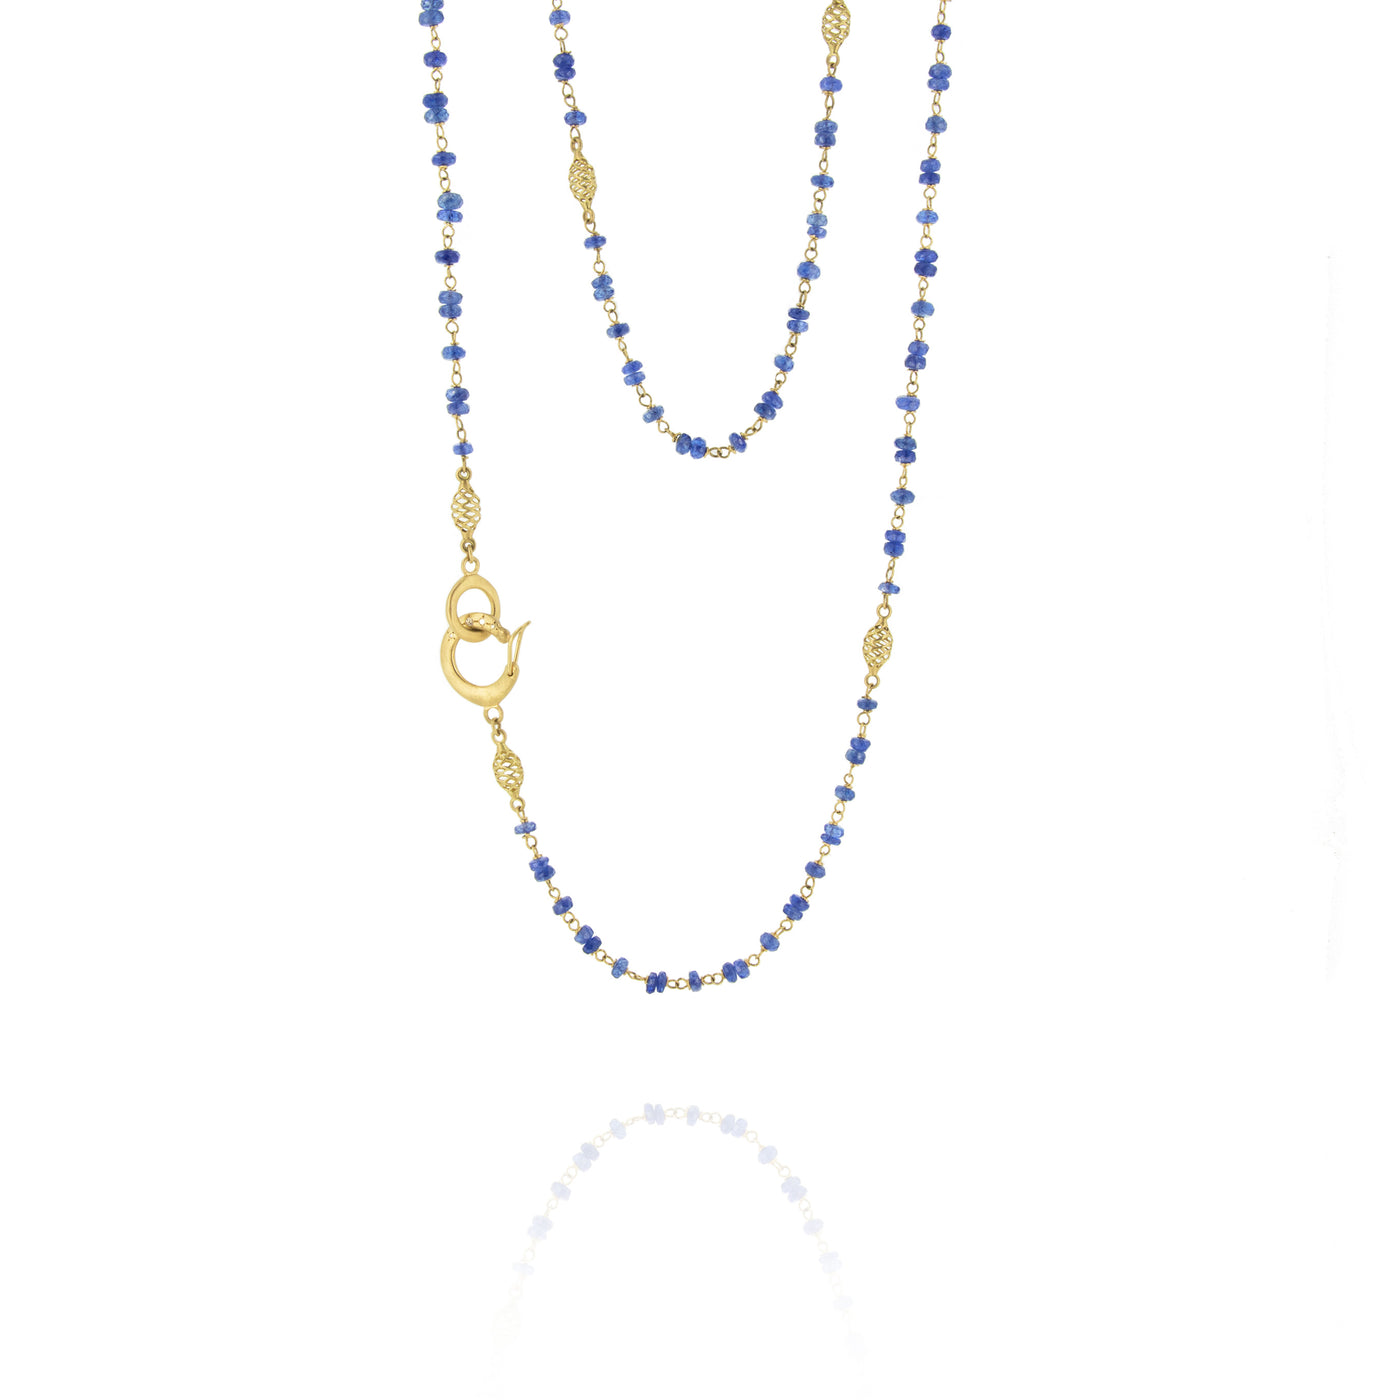 31" Sapphire Beaded Necklace